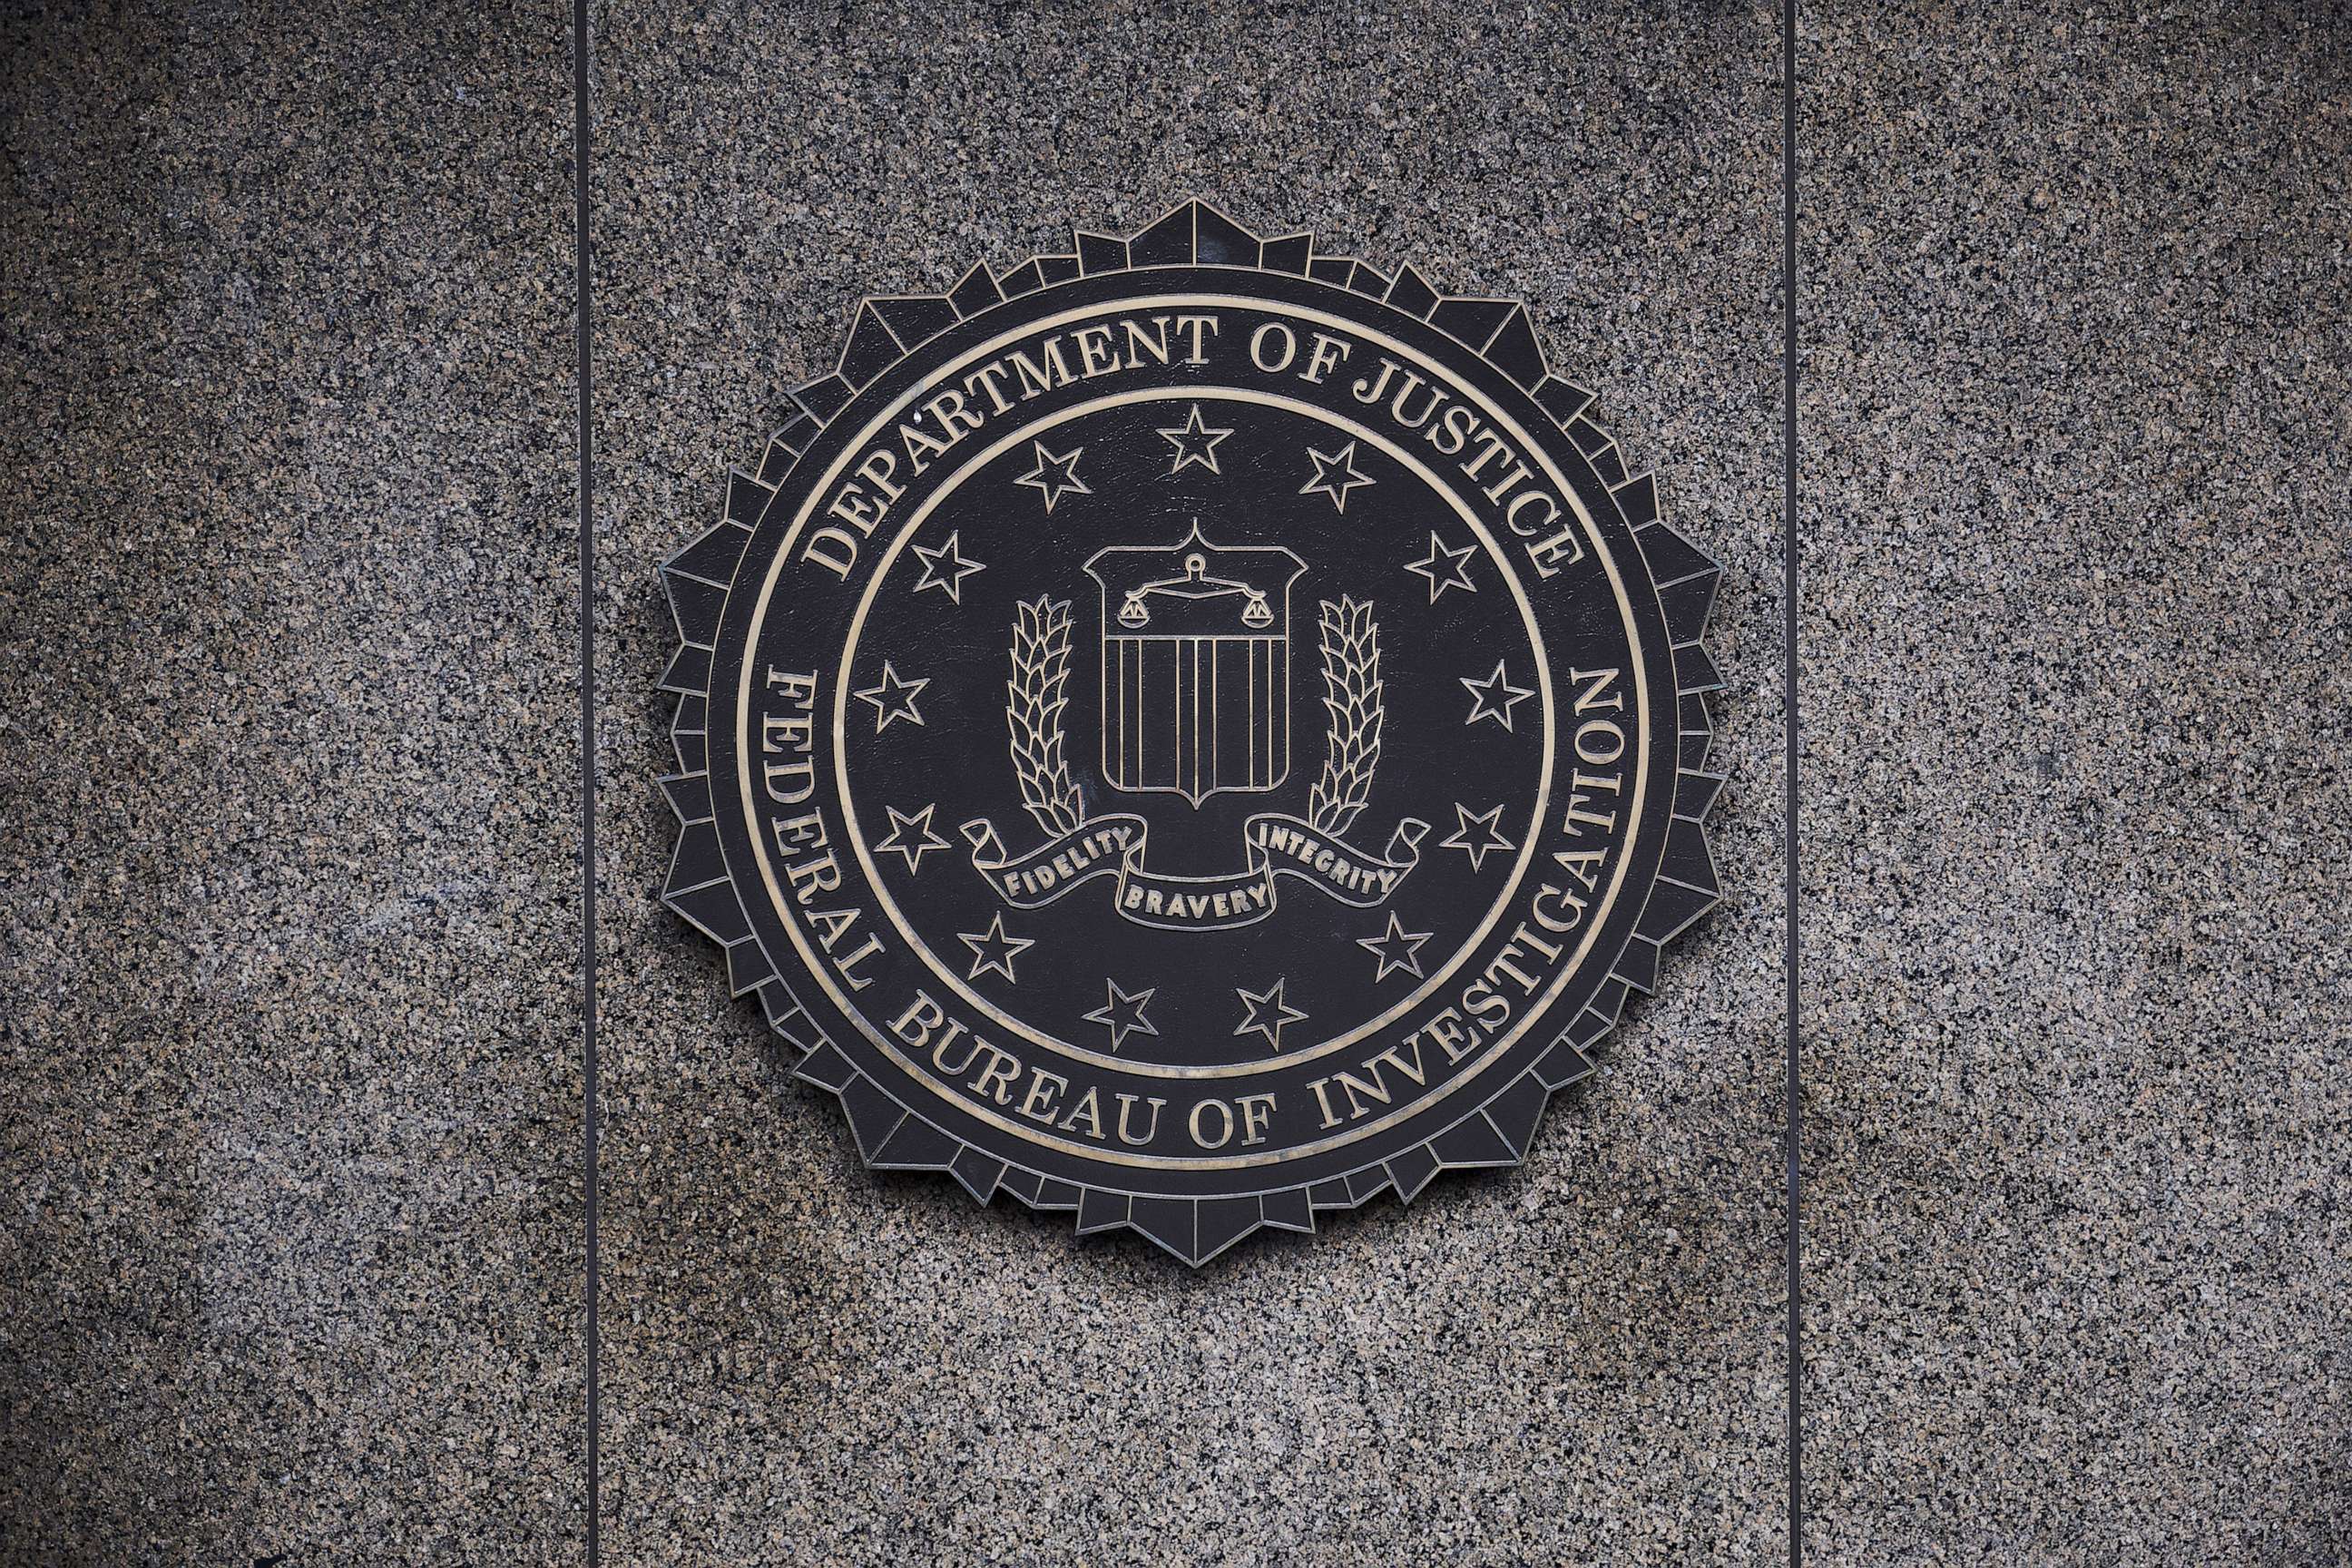 PHOTO: In this Feb. 2, 2018, file photo, the Federal Bureau of Investigation seal is displayed outside the FBI headquarters, in Washington, D.C.